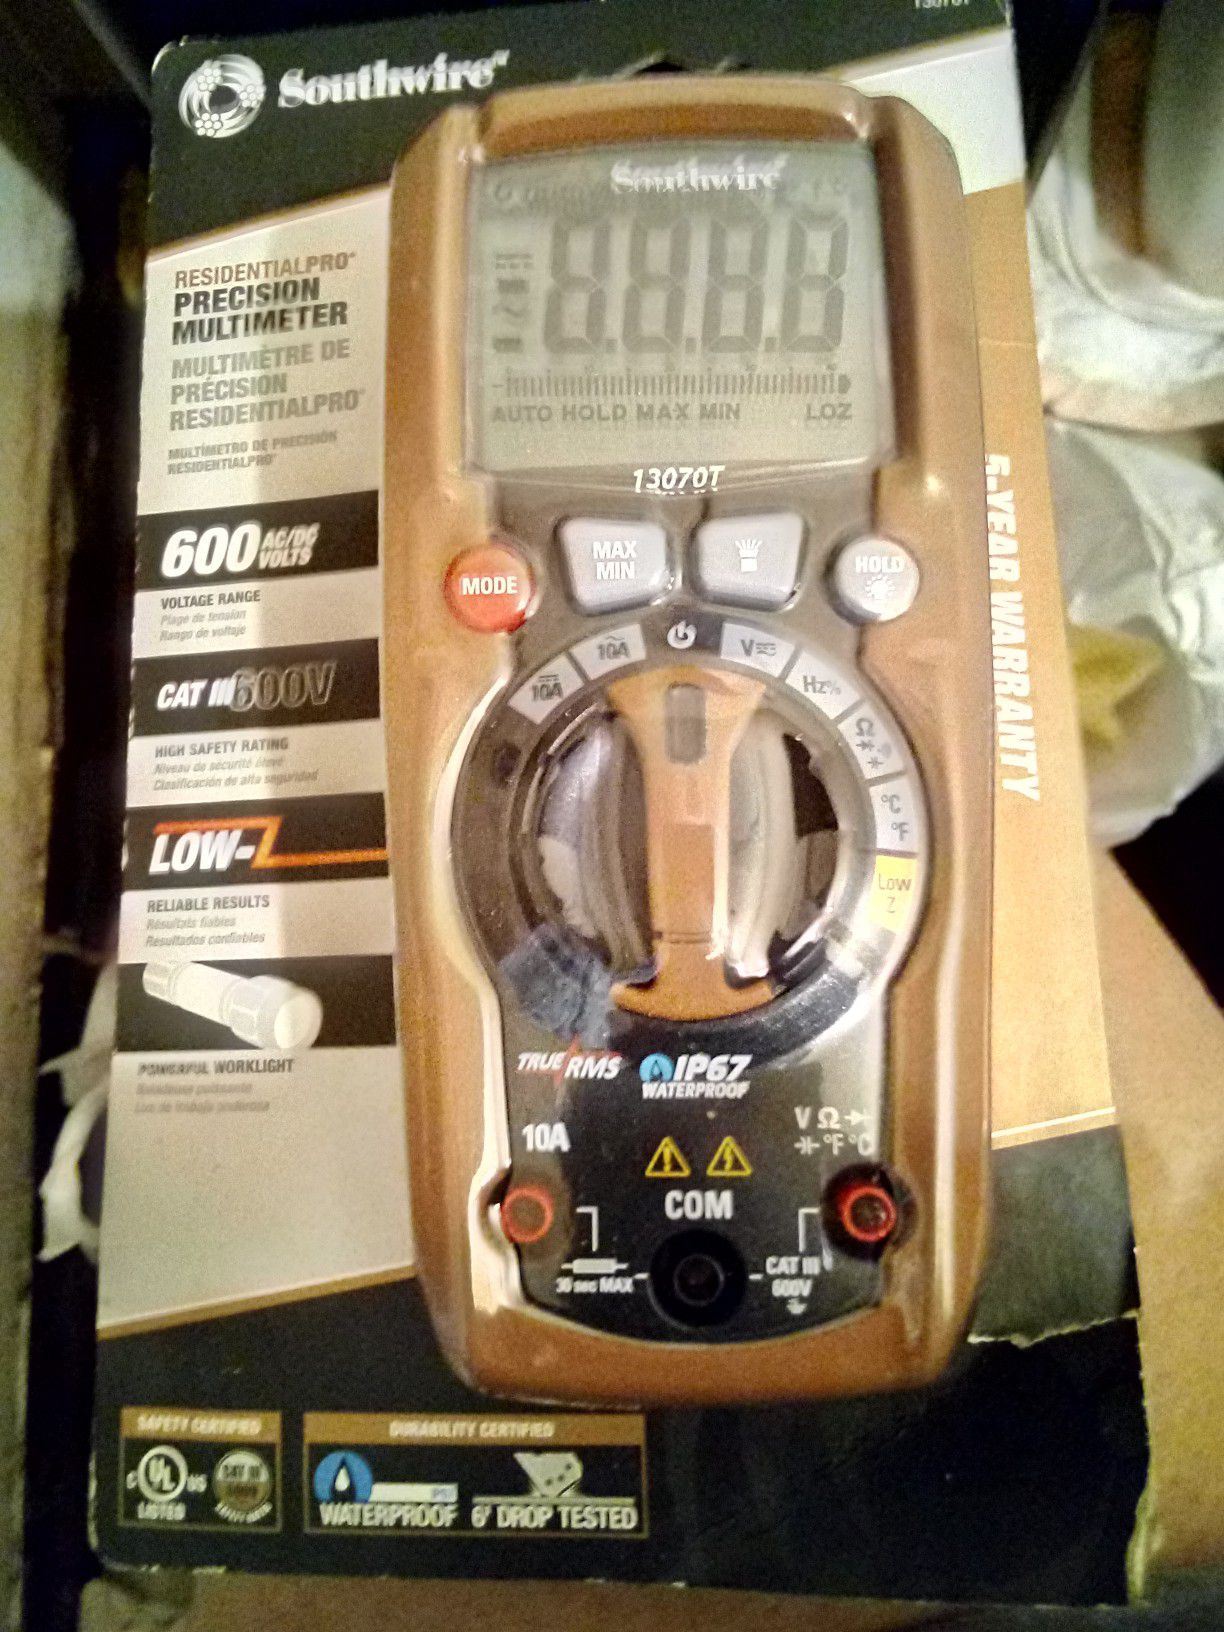 Southwire residential pro precision multimeter